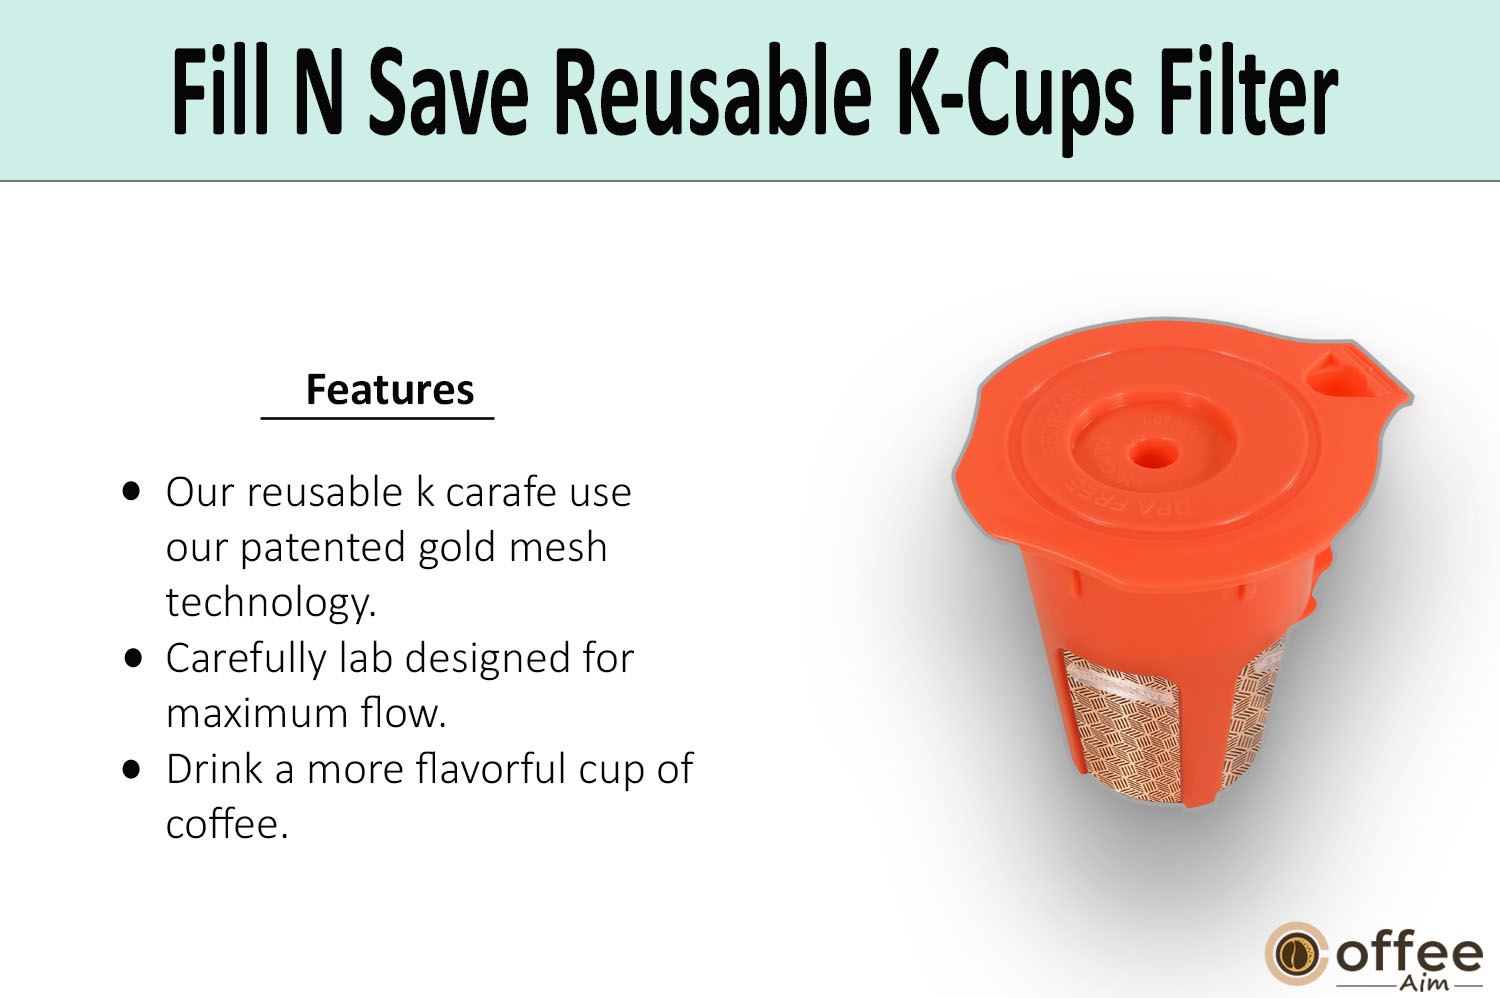 In this image, I elucidate the features of fill n save K-Cup reusable coffee filter